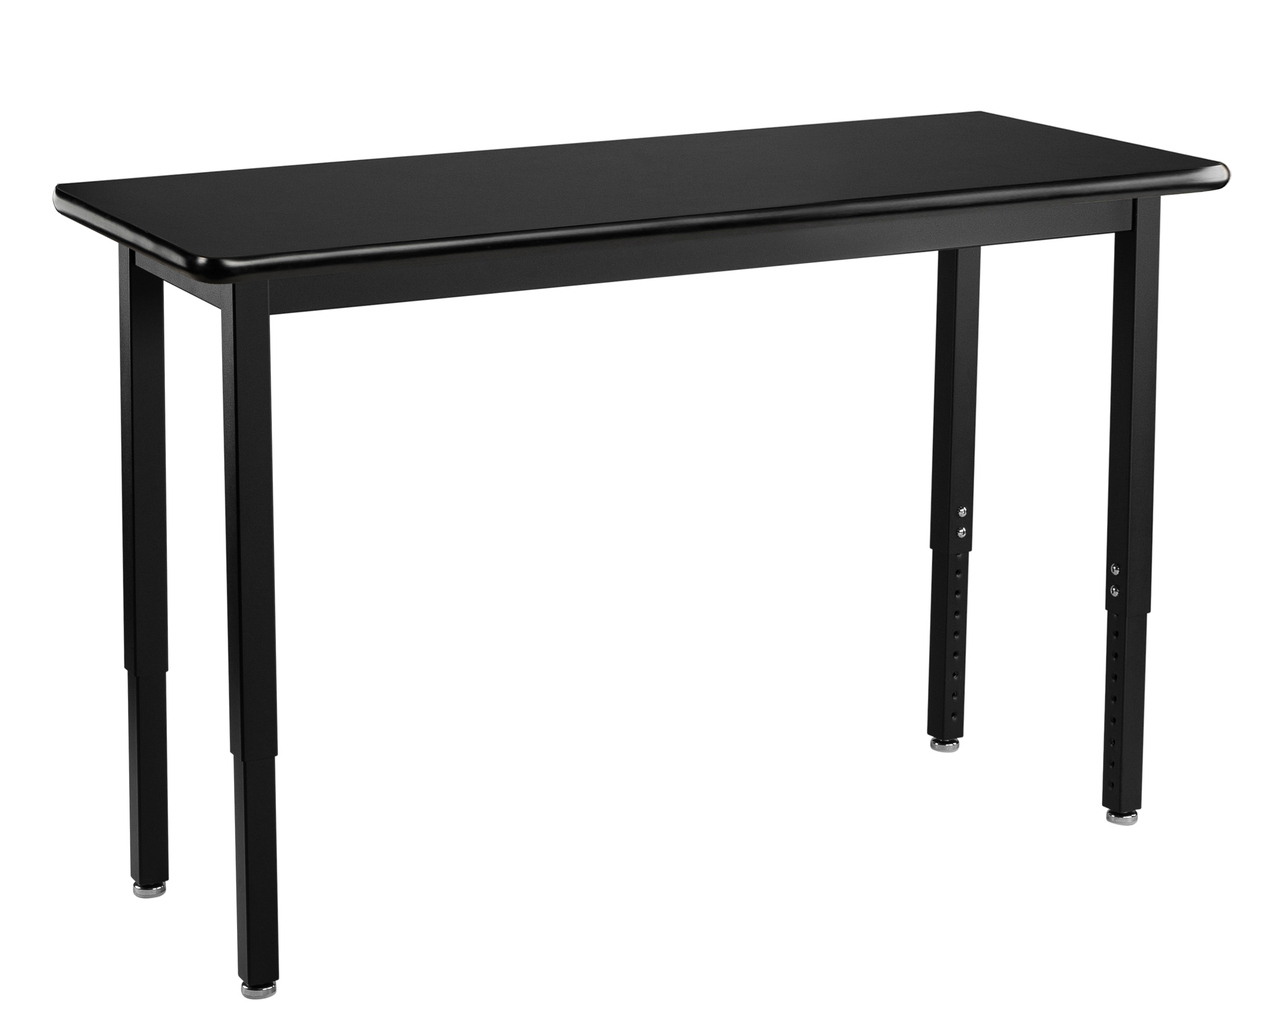 NPS Steel Science Lab Table -  18" x 60" -  HPL Top - Black Surface Color